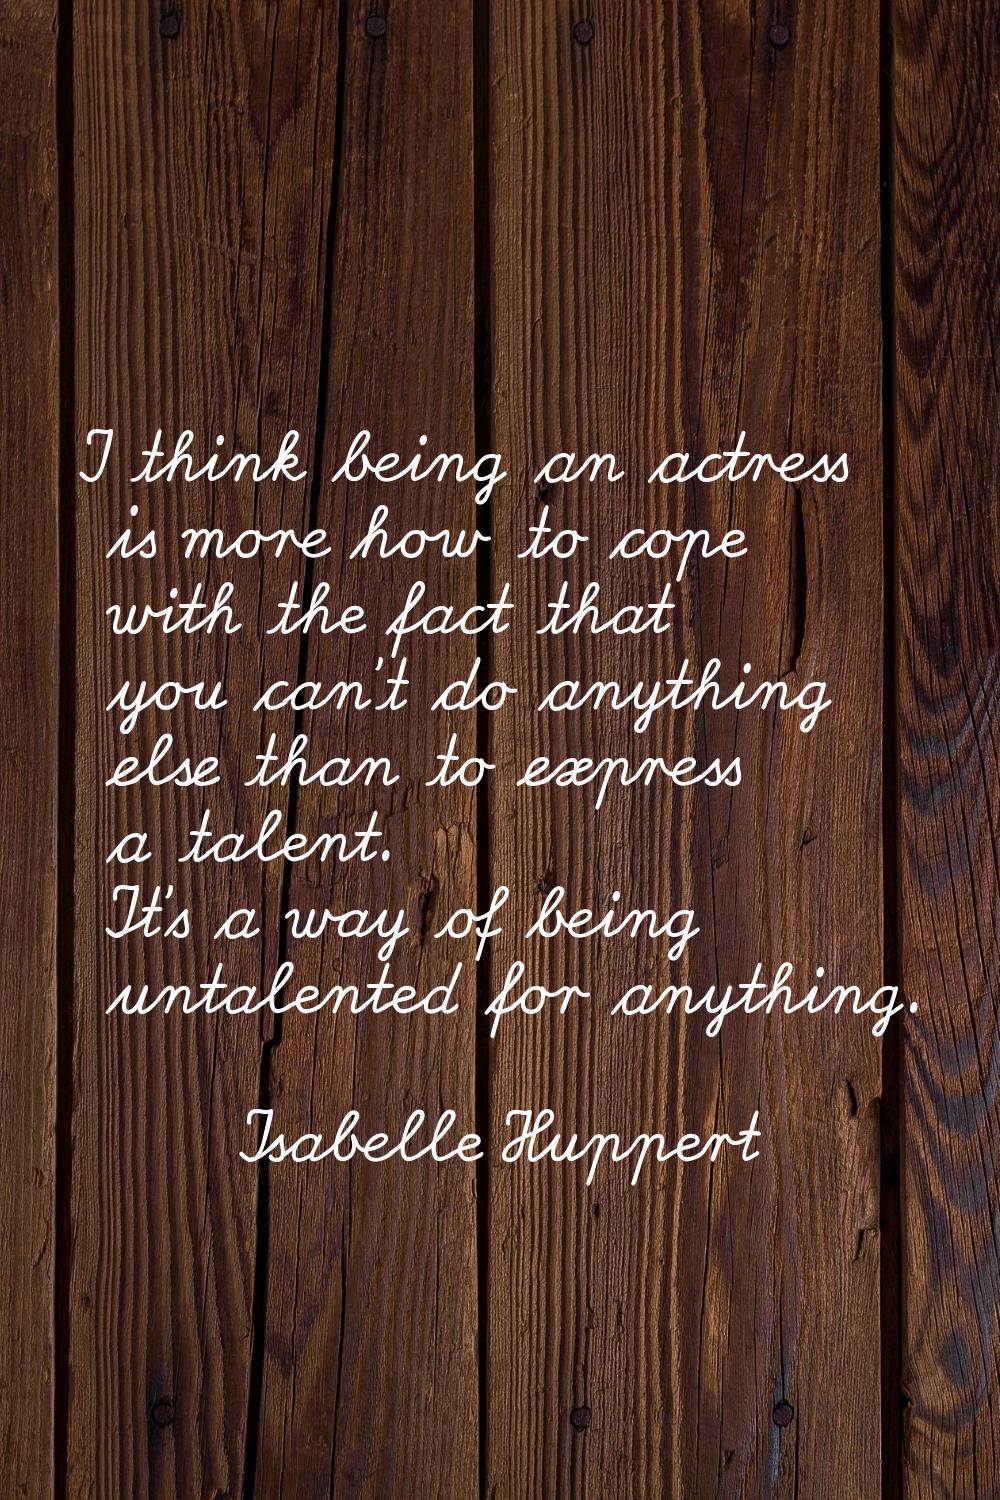 I think being an actress is more how to cope with the fact that you can't do anything else than to 